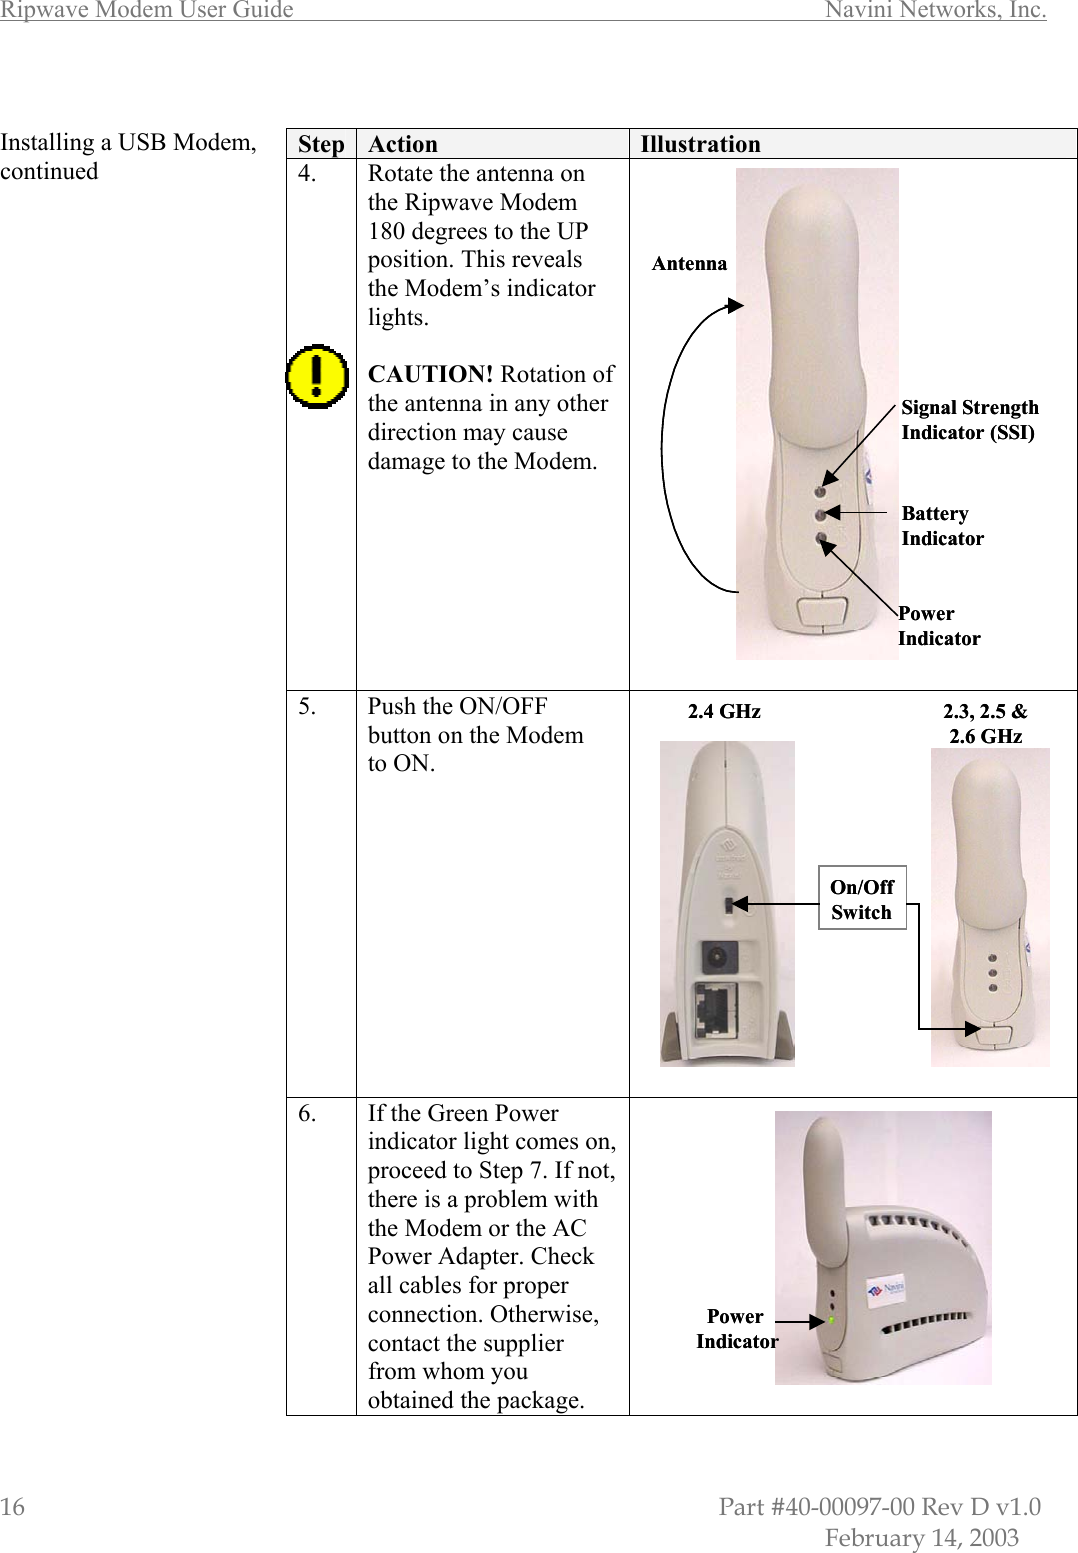 Ripwave Modem User Guide        Navini Networks, Inc. 16                         Part #40-00097-00 Rev D v1.0            February 14, 2003  Installing a USB Modem, continued                                             Step  Action  Illustration 4.  Rotate the antenna on the Ripwave Modem 180 degrees to the UP position. This reveals the Modem’s indicator lights.  CAUTION! Rotation of the antenna in any other direction may cause damage to the Modem.   5.  Push the ON/OFF button on the Modem  to ON.  6.  If the Green Power indicator light comes on, proceed to Step 7. If not, there is a problem with the Modem or the AC Power Adapter. Check all cables for proper connection. Otherwise, contact the supplier from whom you obtained the package.    Signal Strength Indicator (SSI)Power IndicatorBattery IndicatorAntennaSignal Strength Indicator (SSI)Power IndicatorBattery IndicatorAntennaOn/Off Switch2.4 GHz  2.3, 2.5 &amp;2.6 GHz On/Off Switch2.4 GHz  2.3, 2.5 &amp;2.6 GHz PowerIndicatorPowerIndicator